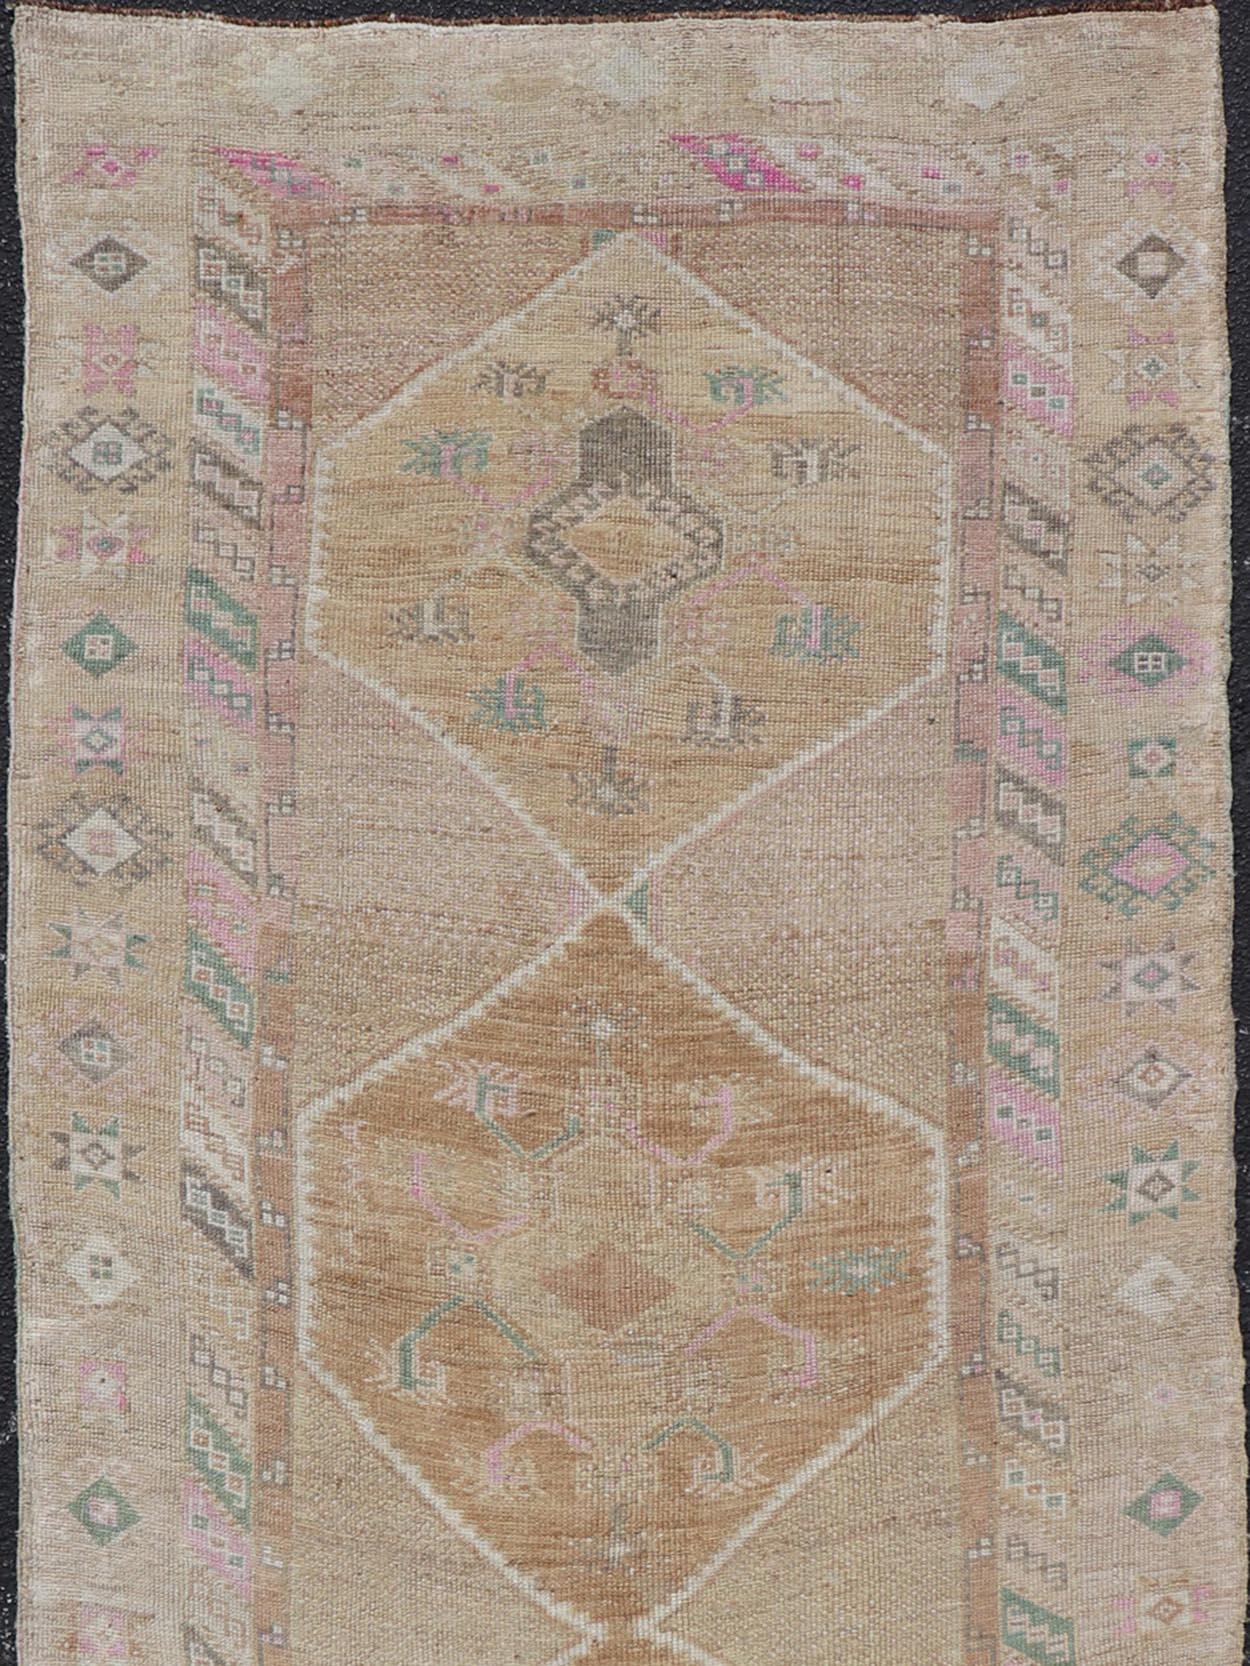 Vintage Turkish runner in Brown background, accent colors, tan, green, light blue, taupe, Keivan Woven Arts / rug/TU-MTU-121, country of origin / type: Turkey / Oushak, circa 1940

Measures: 4'3 x 11'8.